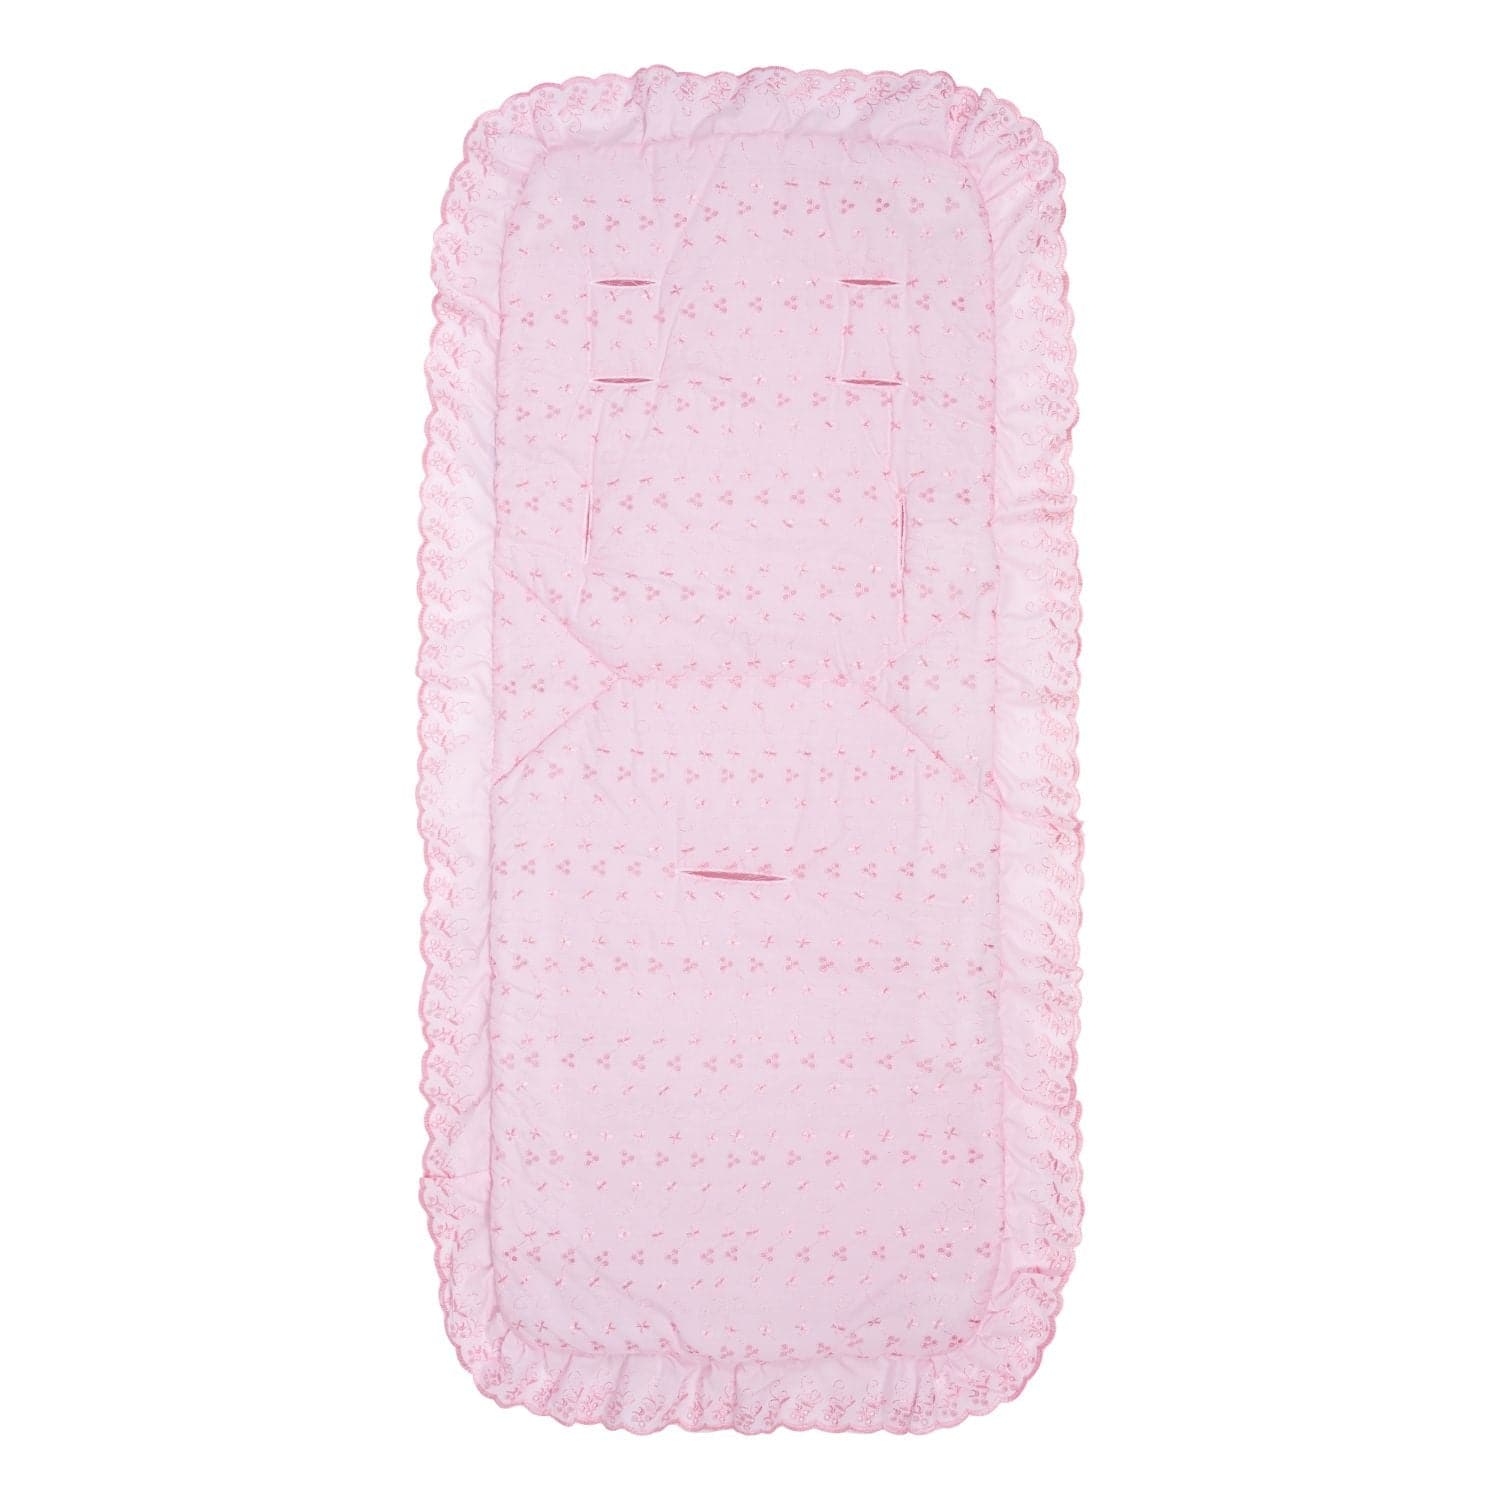 Broderie Anglaise Pushchair Seat Liner Compatible with Little Shield - Fits All Models - For Your Little One